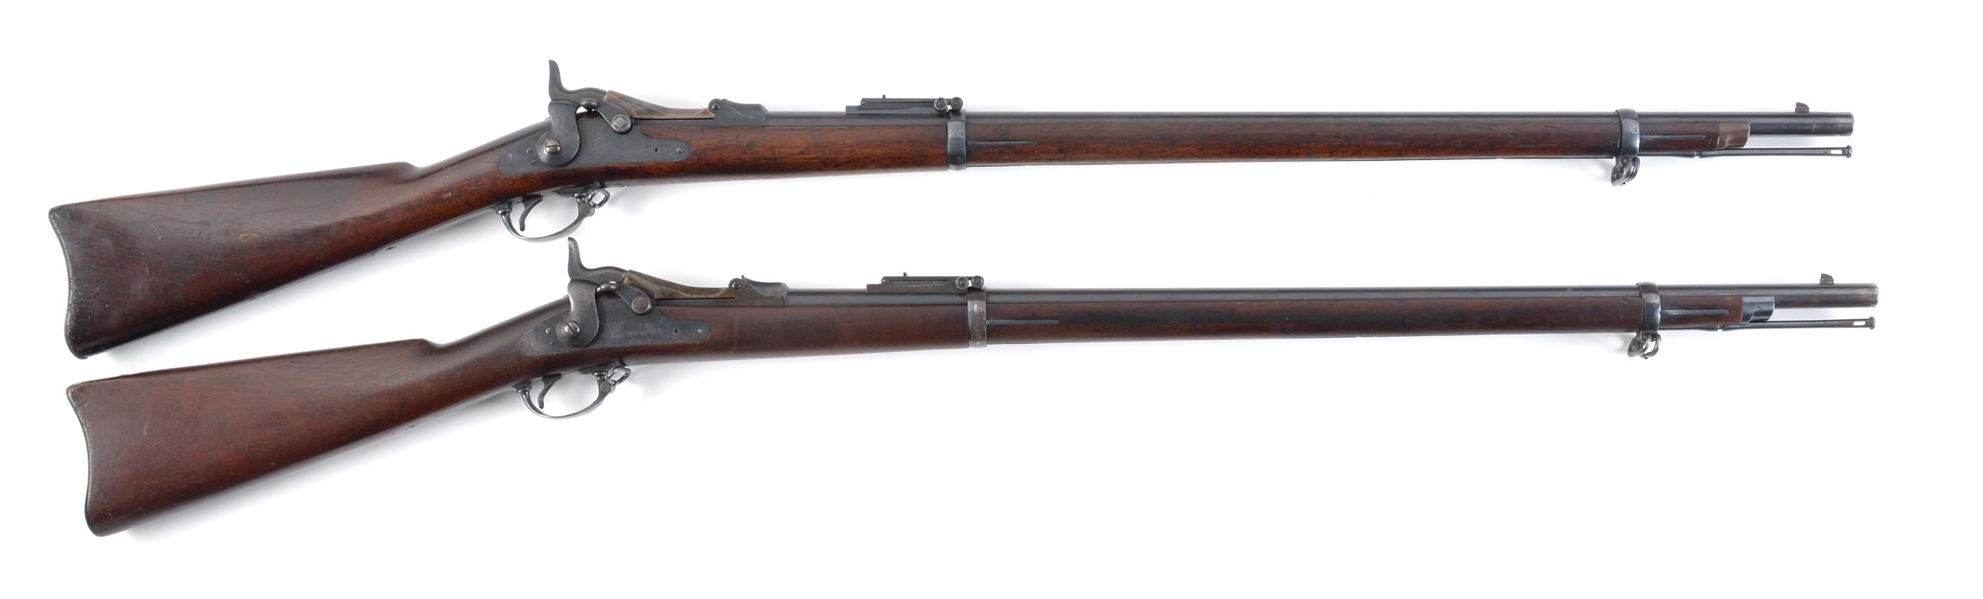 (A) PAIR OF SPRINGFIELD 1884 TRAPDOOR RIFLES IN .45-70.